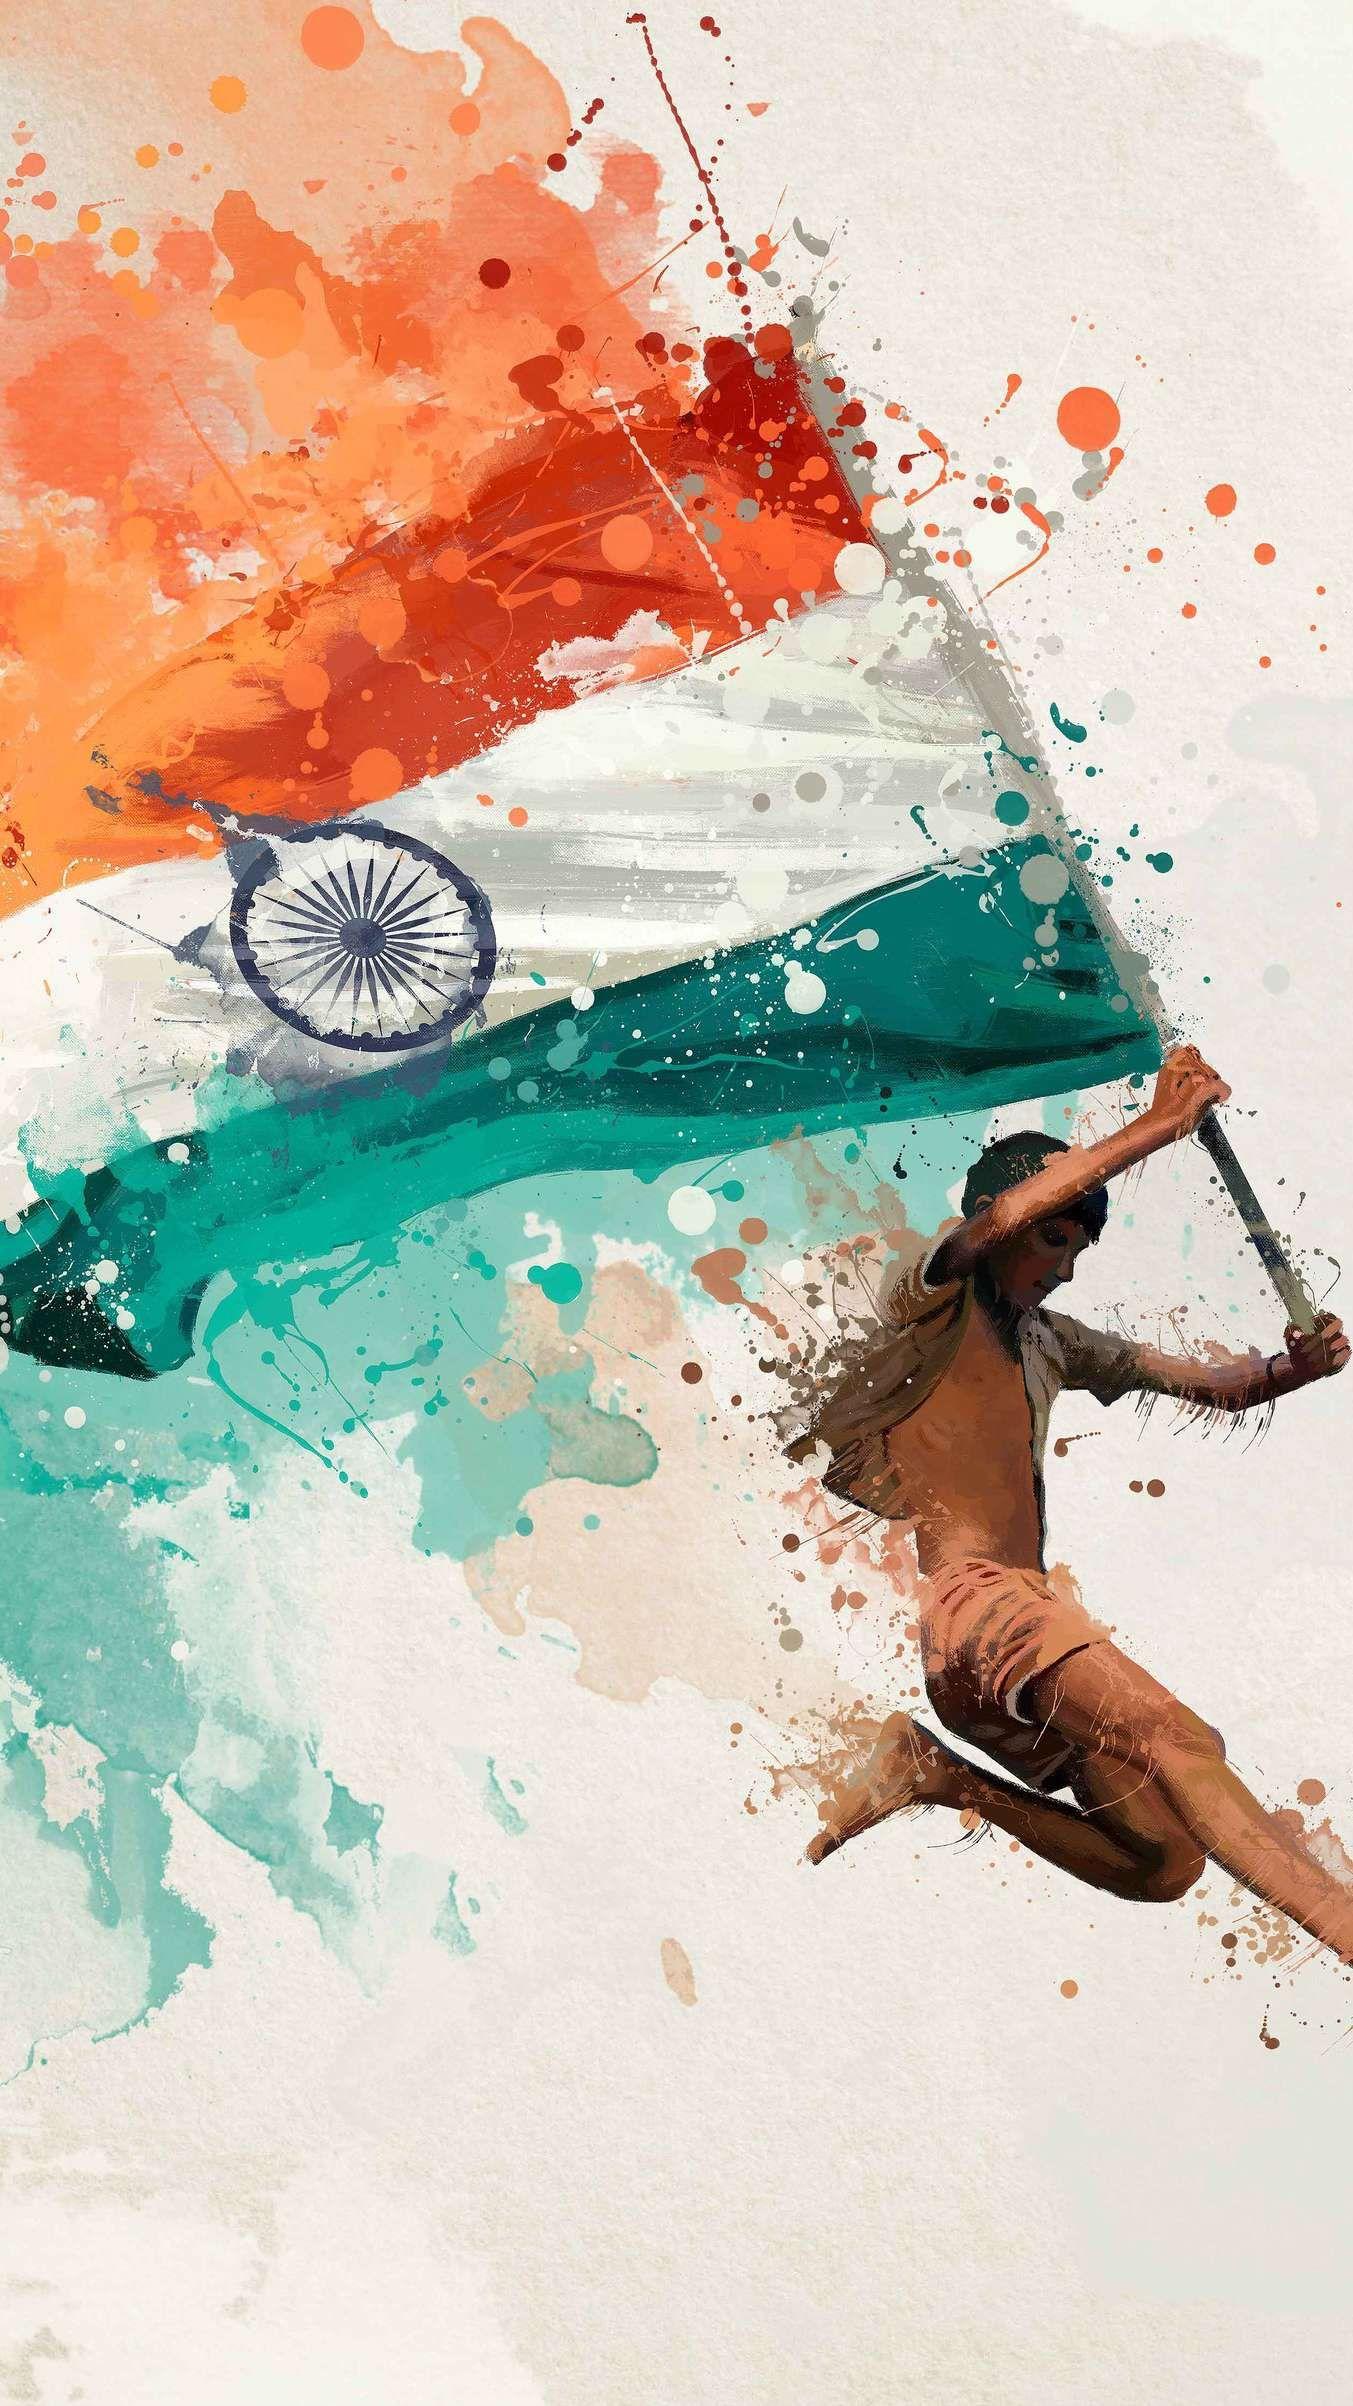 Independence day Indian Flag iPhone Wallpaper. Indian flag